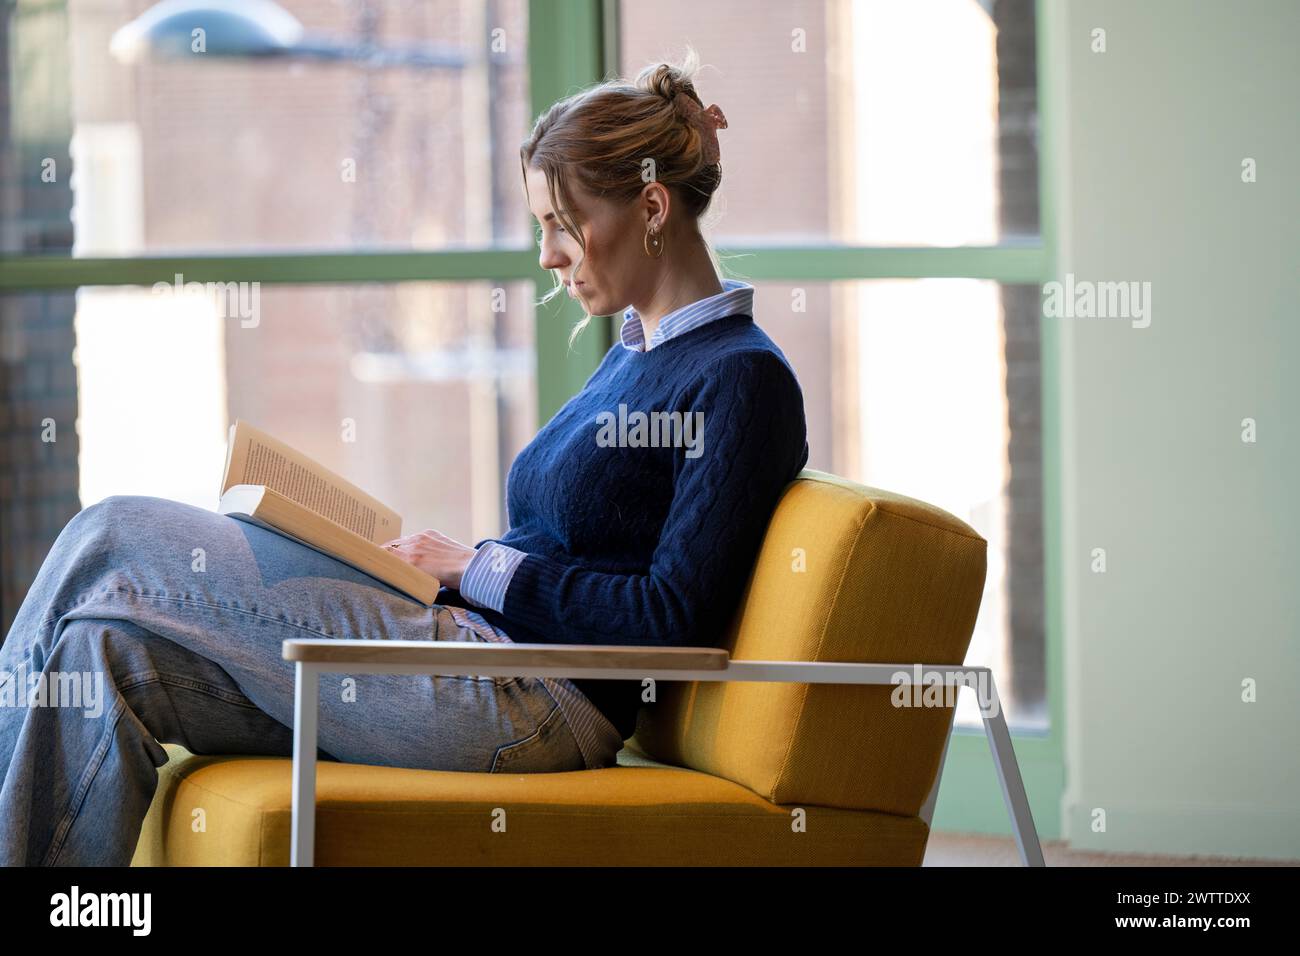 Person engrossed in a book while relaxing in a yellow chair. Stock Photo